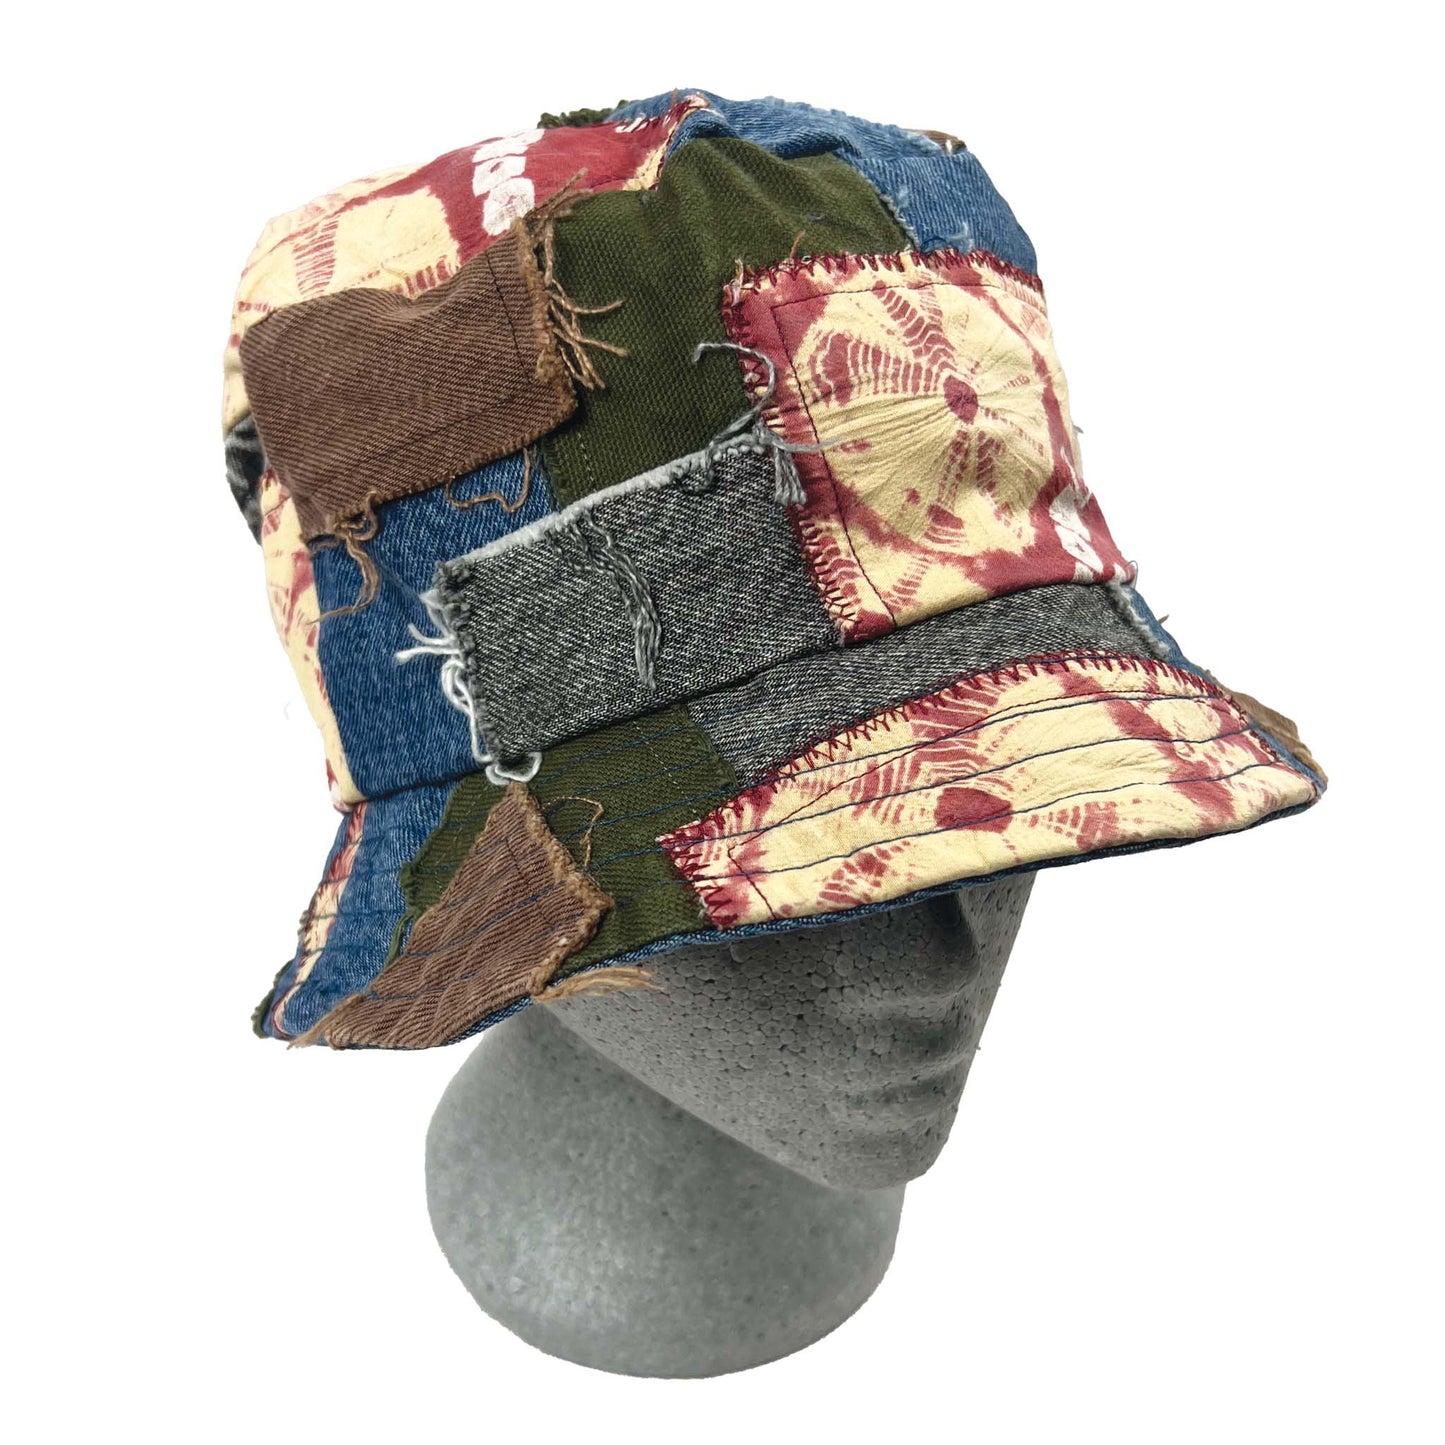 Patched Extra Big Bucket Hat Light Blue/Grey/Green/Brown w Japanese Kimono